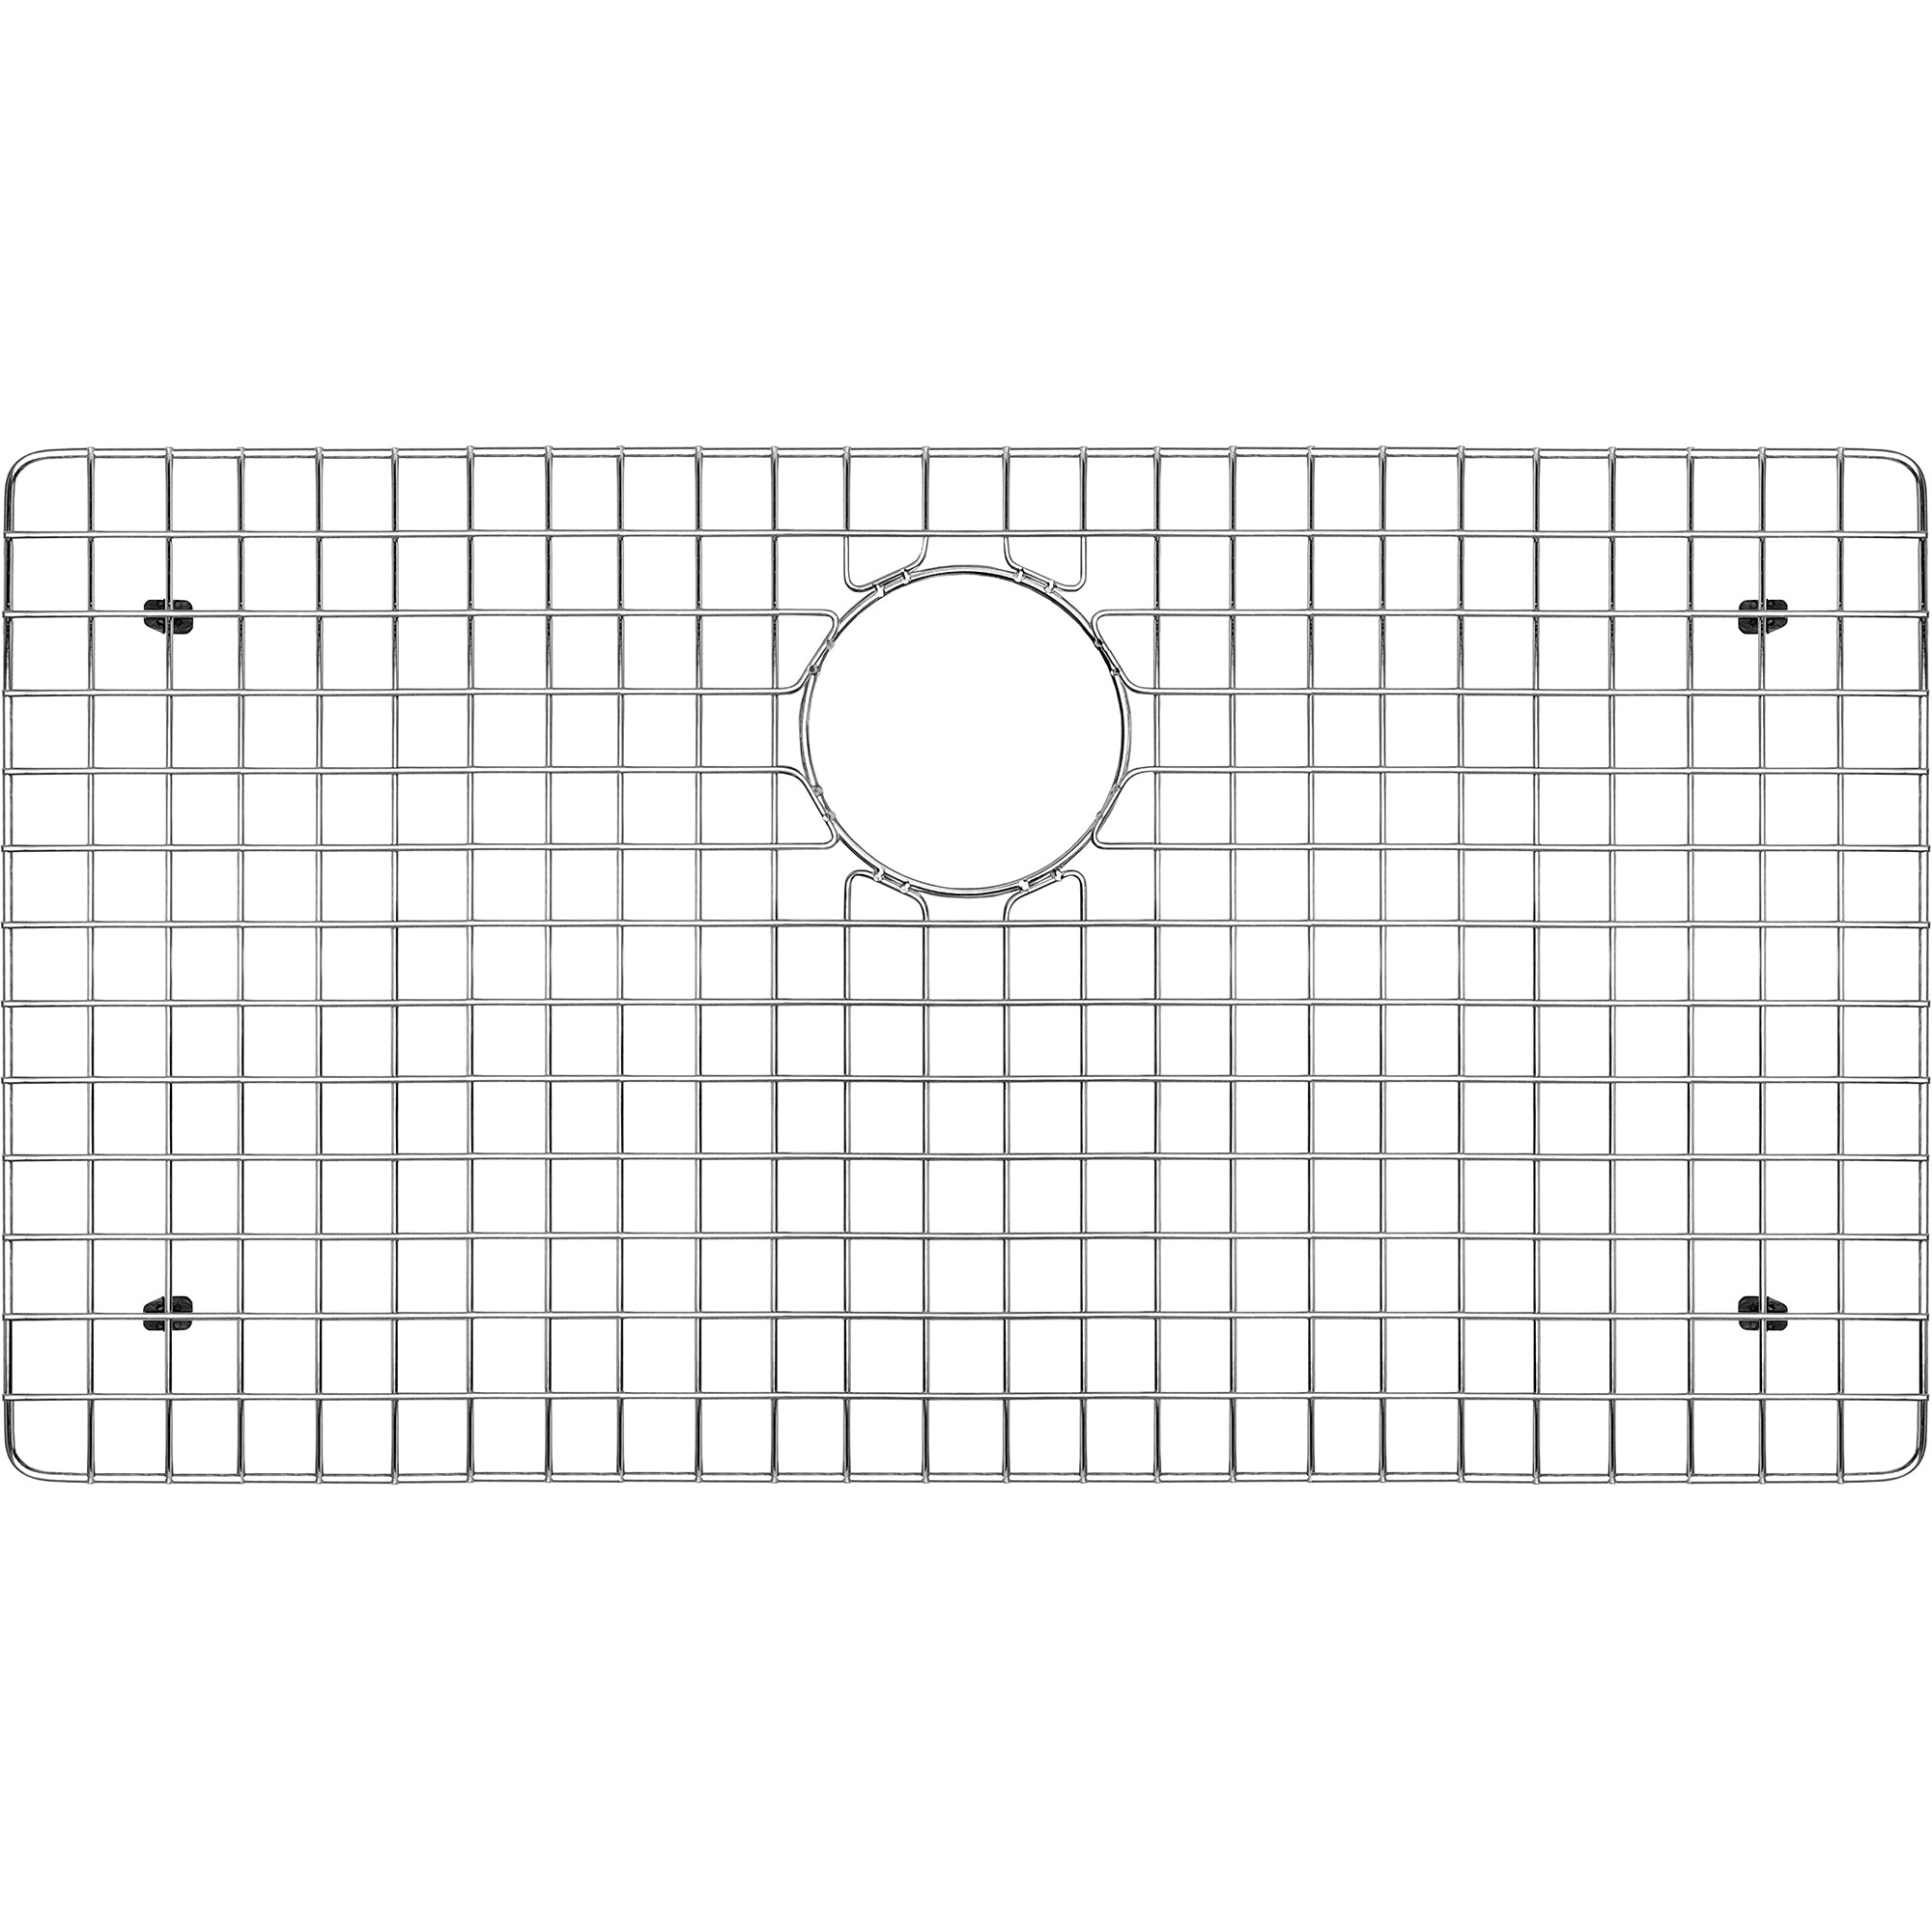 Stainless Steel Kitchen Sink Grid For Noah's Sink Model WHNCMAP3021